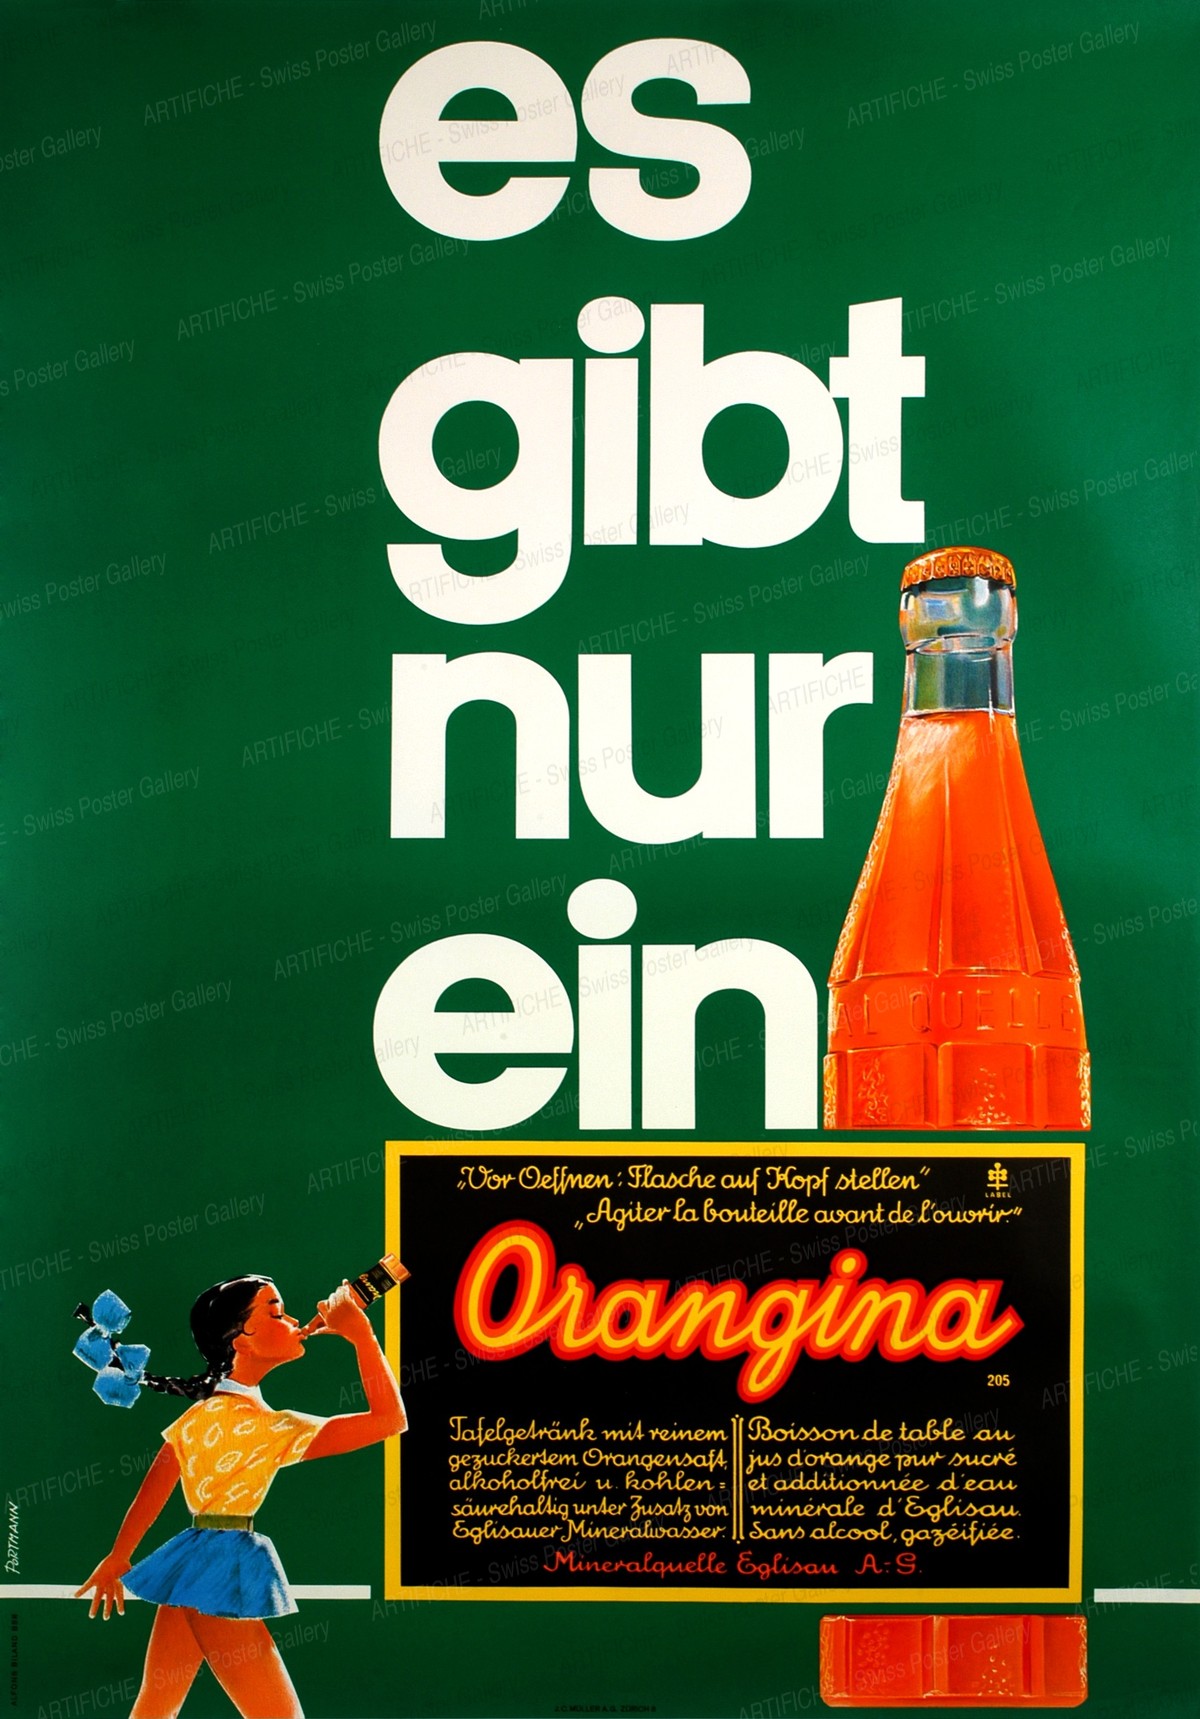 There is only one Orangina, Hans Biland Agency / Portmann